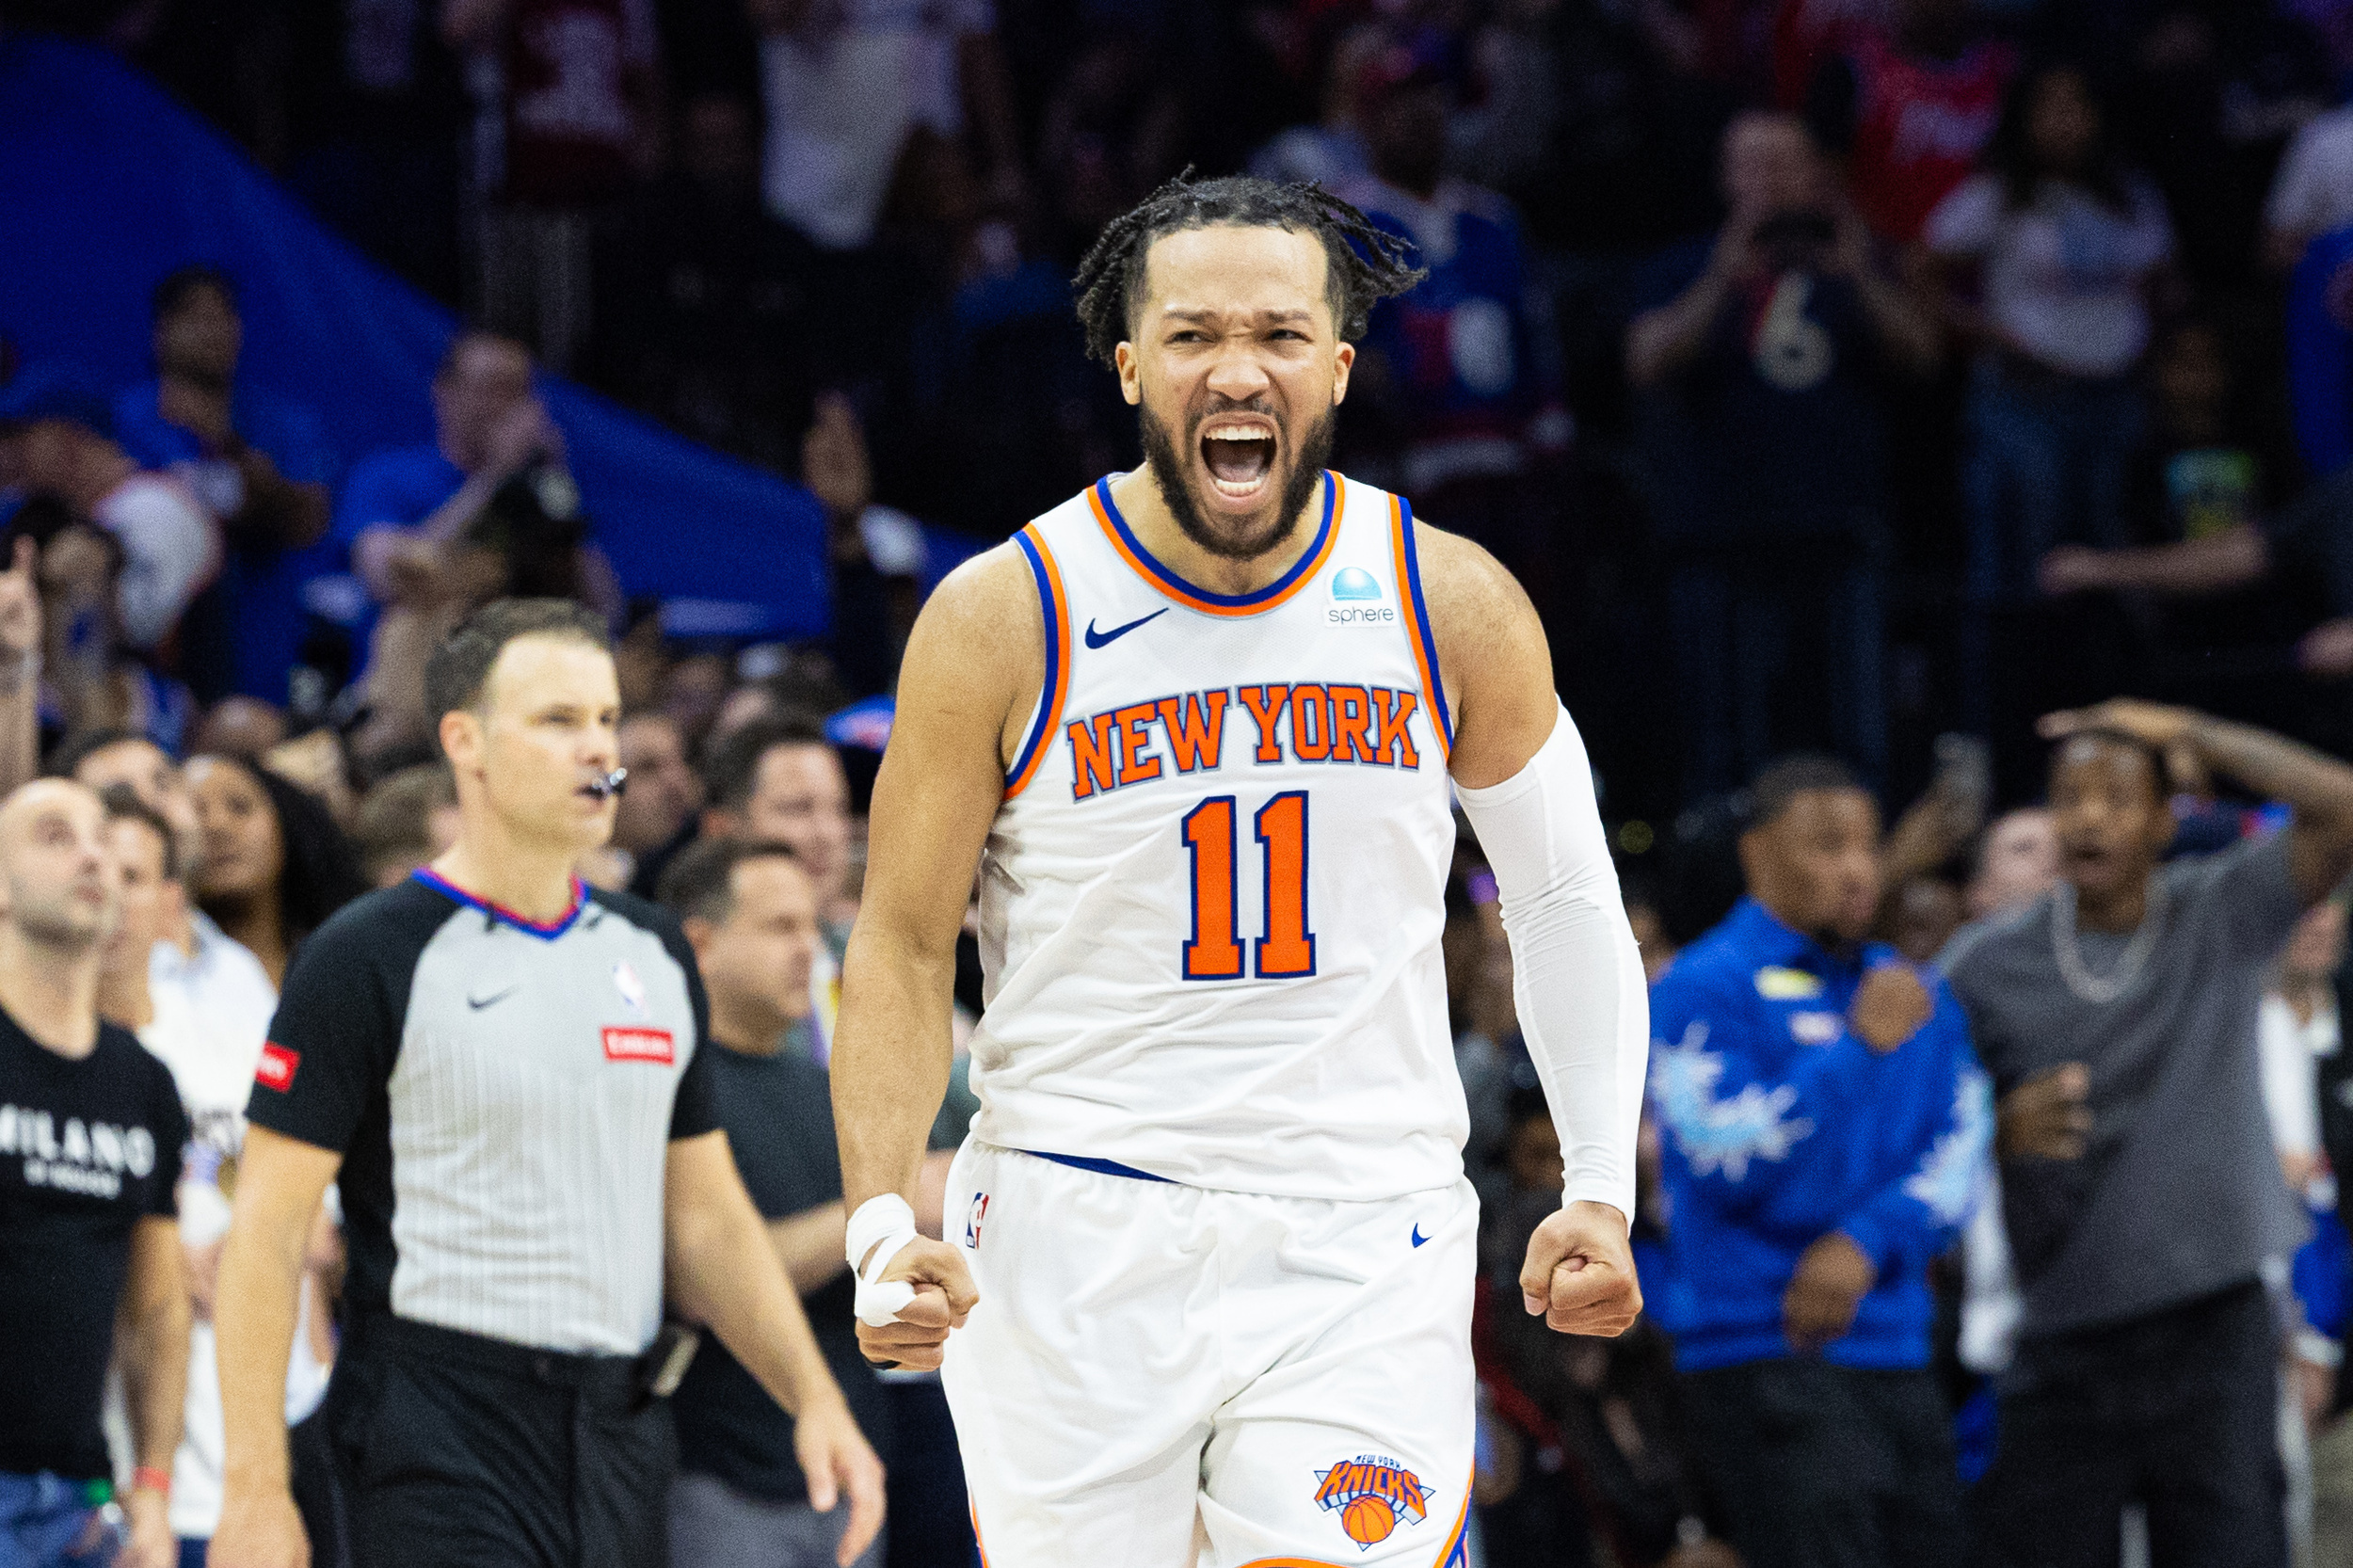 knicks guard joins nba royalty in closeout win against 76ers